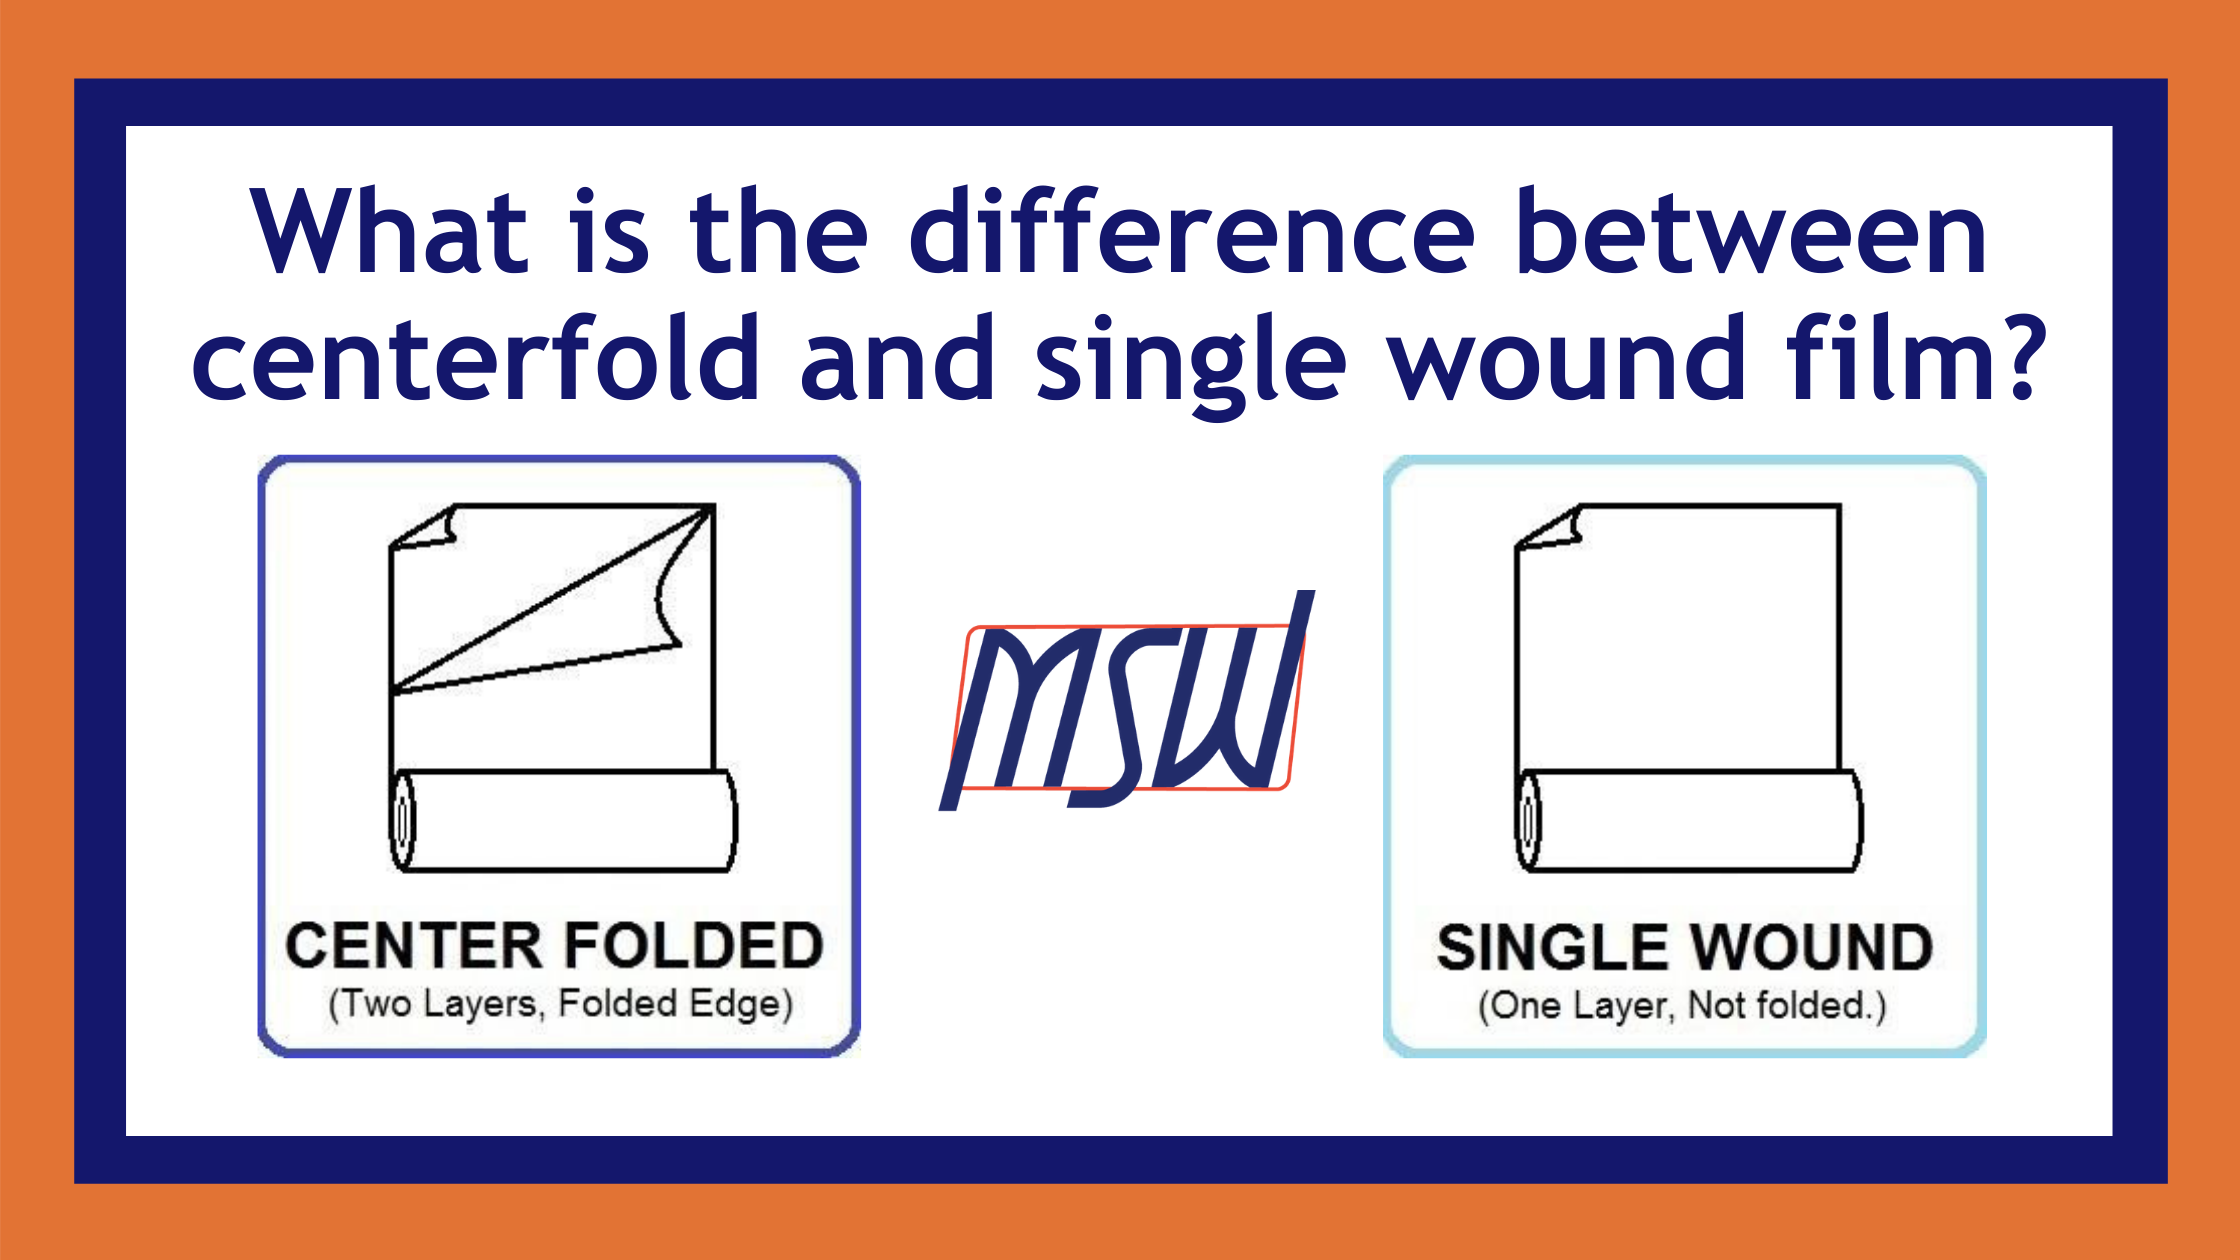 What is the difference between centerfold and single wound film?